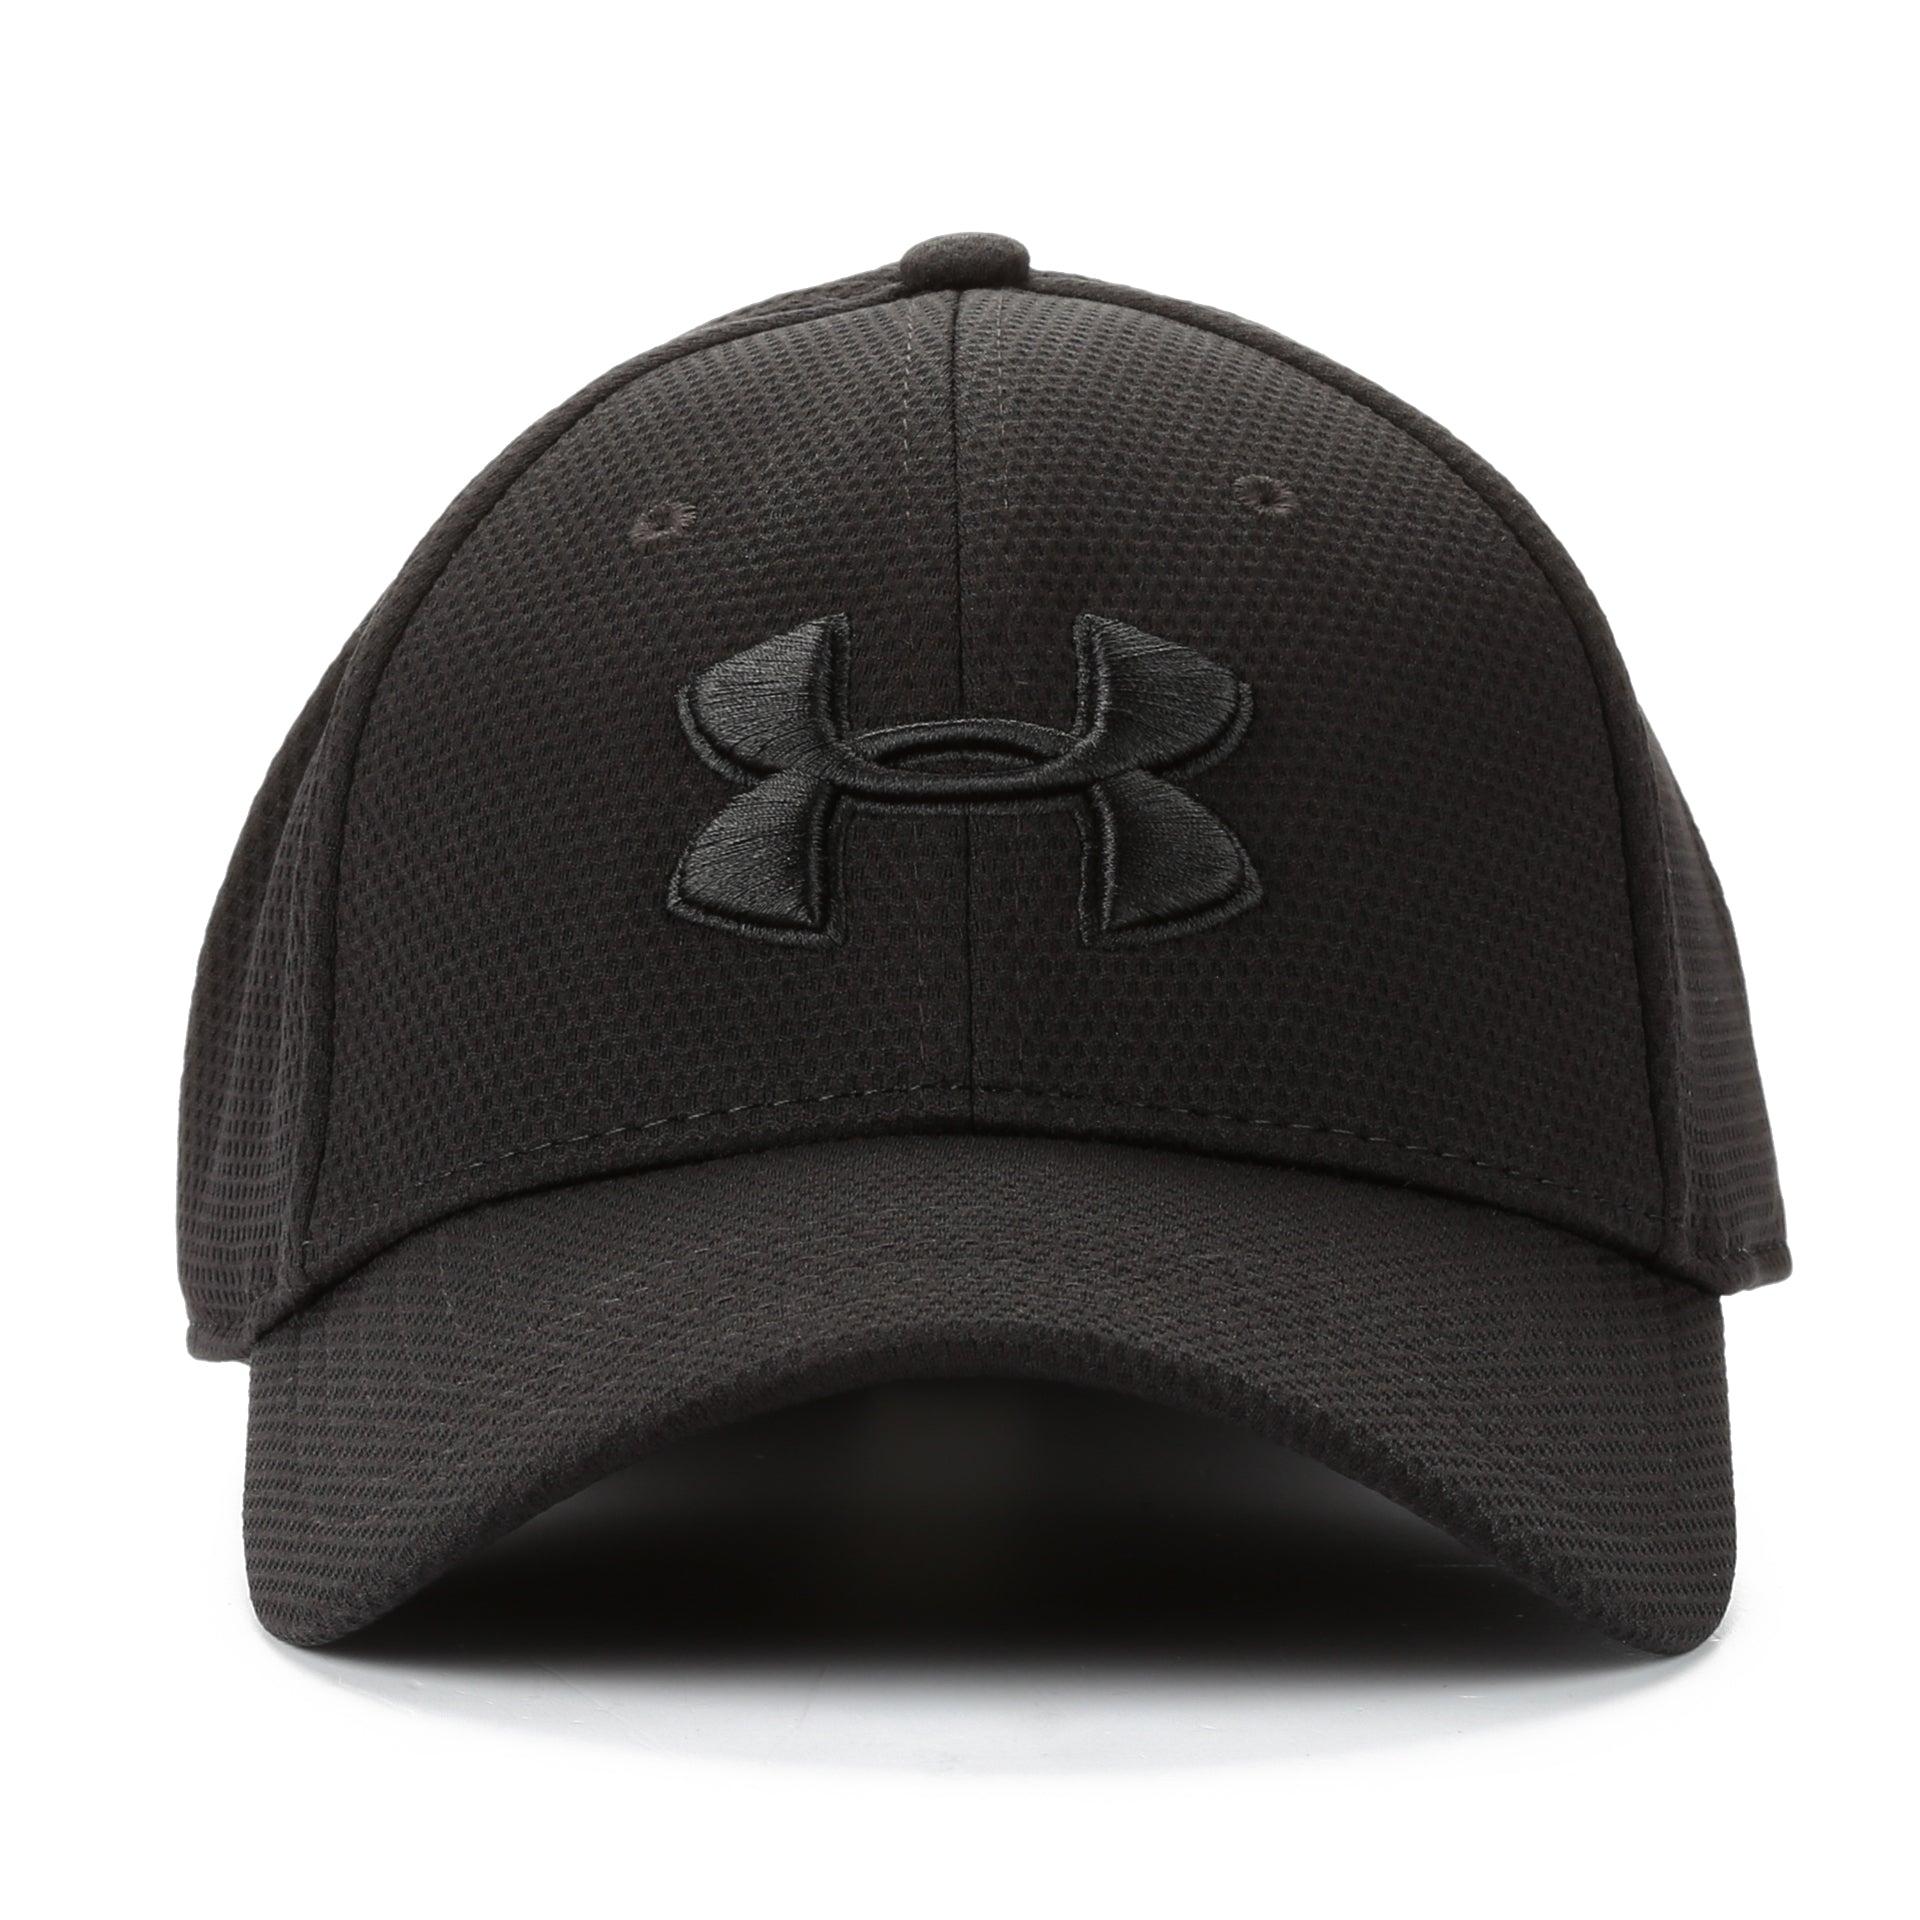 Oportuno Exactitud impermeable Under Armour Blitzing II Stretch Fit Hat - Black/Black - New Star